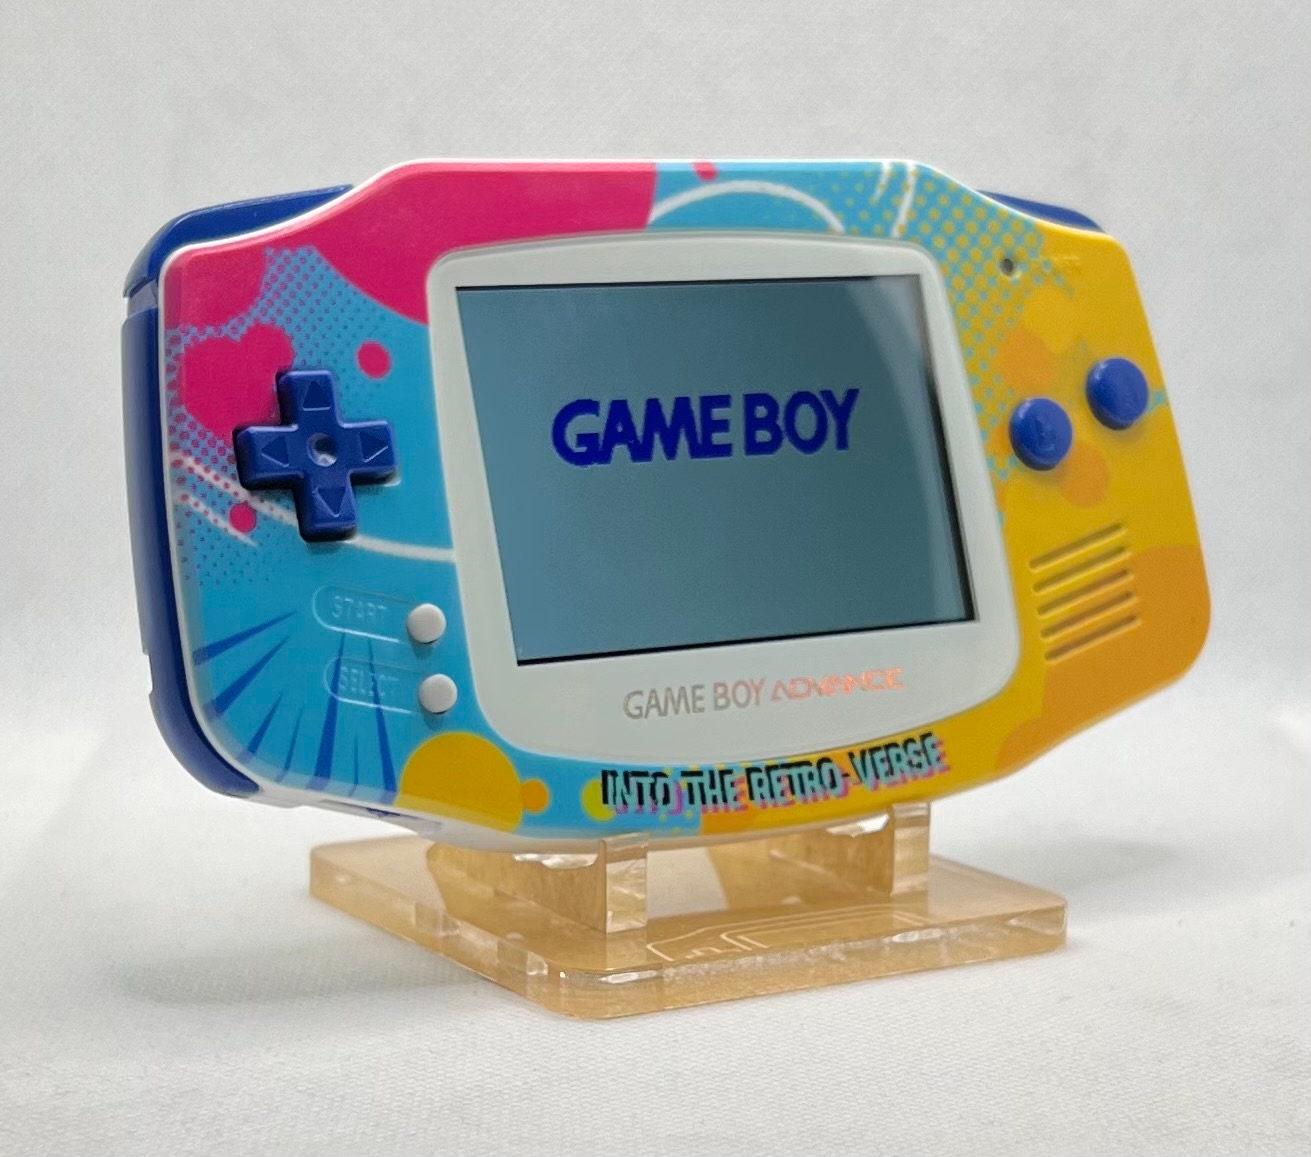 The Super Retro Boy is a great remake of the original Game Boy - The Verge